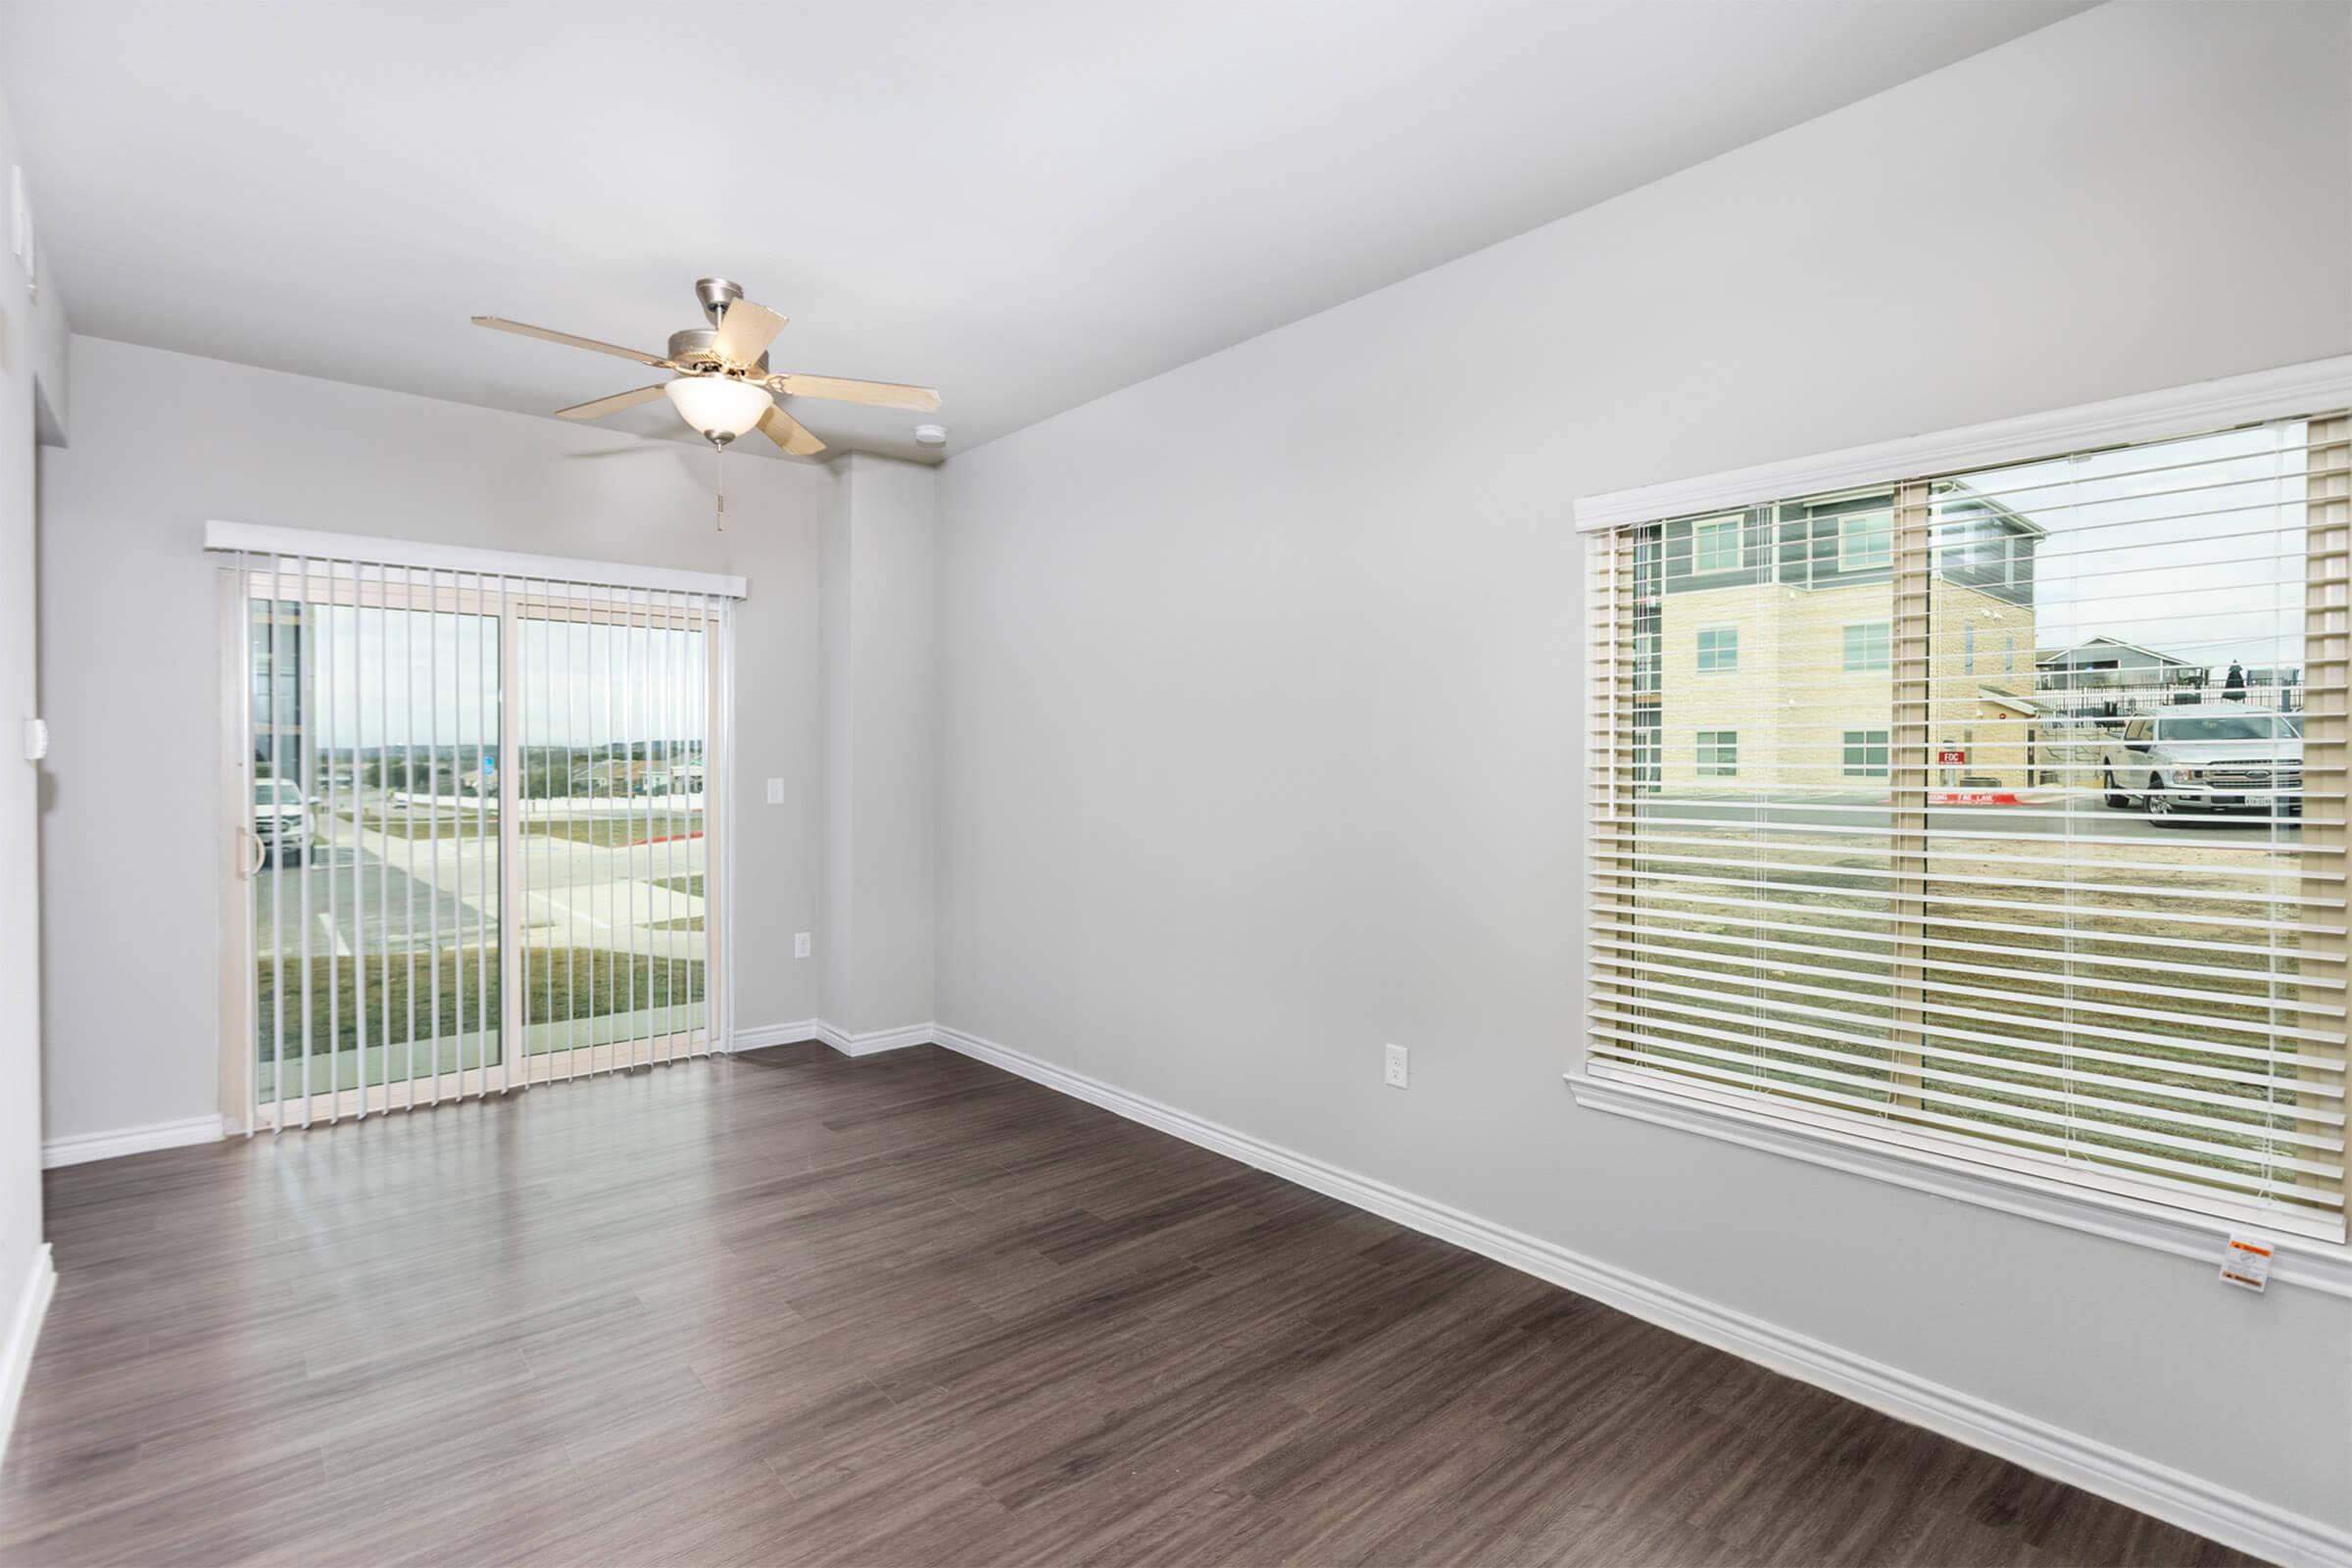 SPACIOUS APARTMENTS FOR RENT IN KERRVILLE, TX